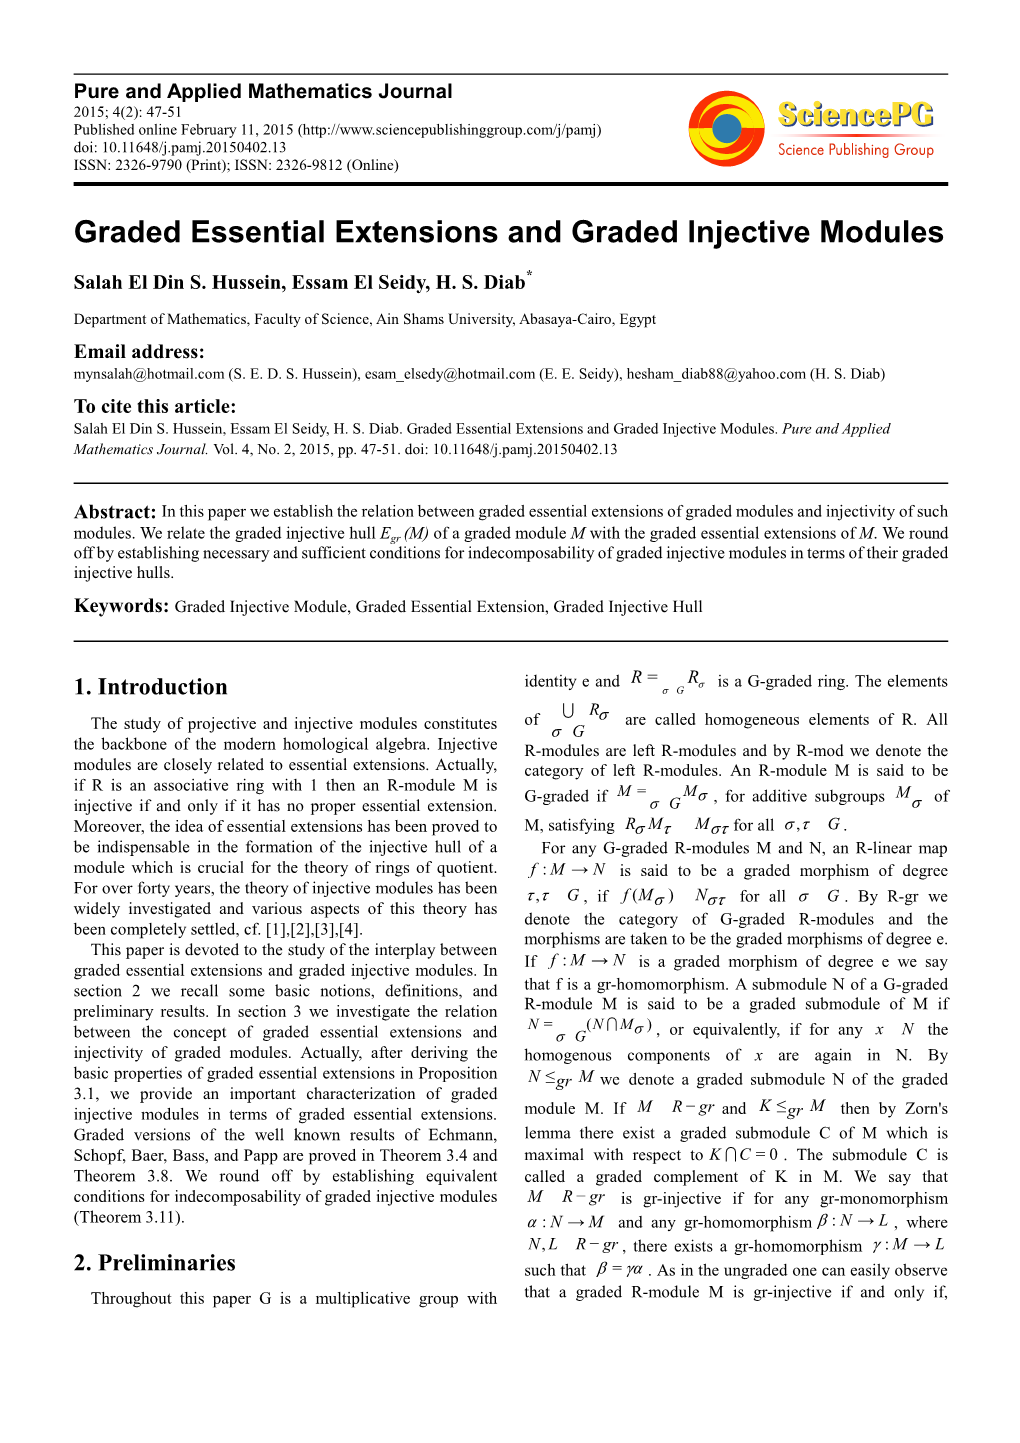 Graded Essential Extensions and Graded Injective Modules